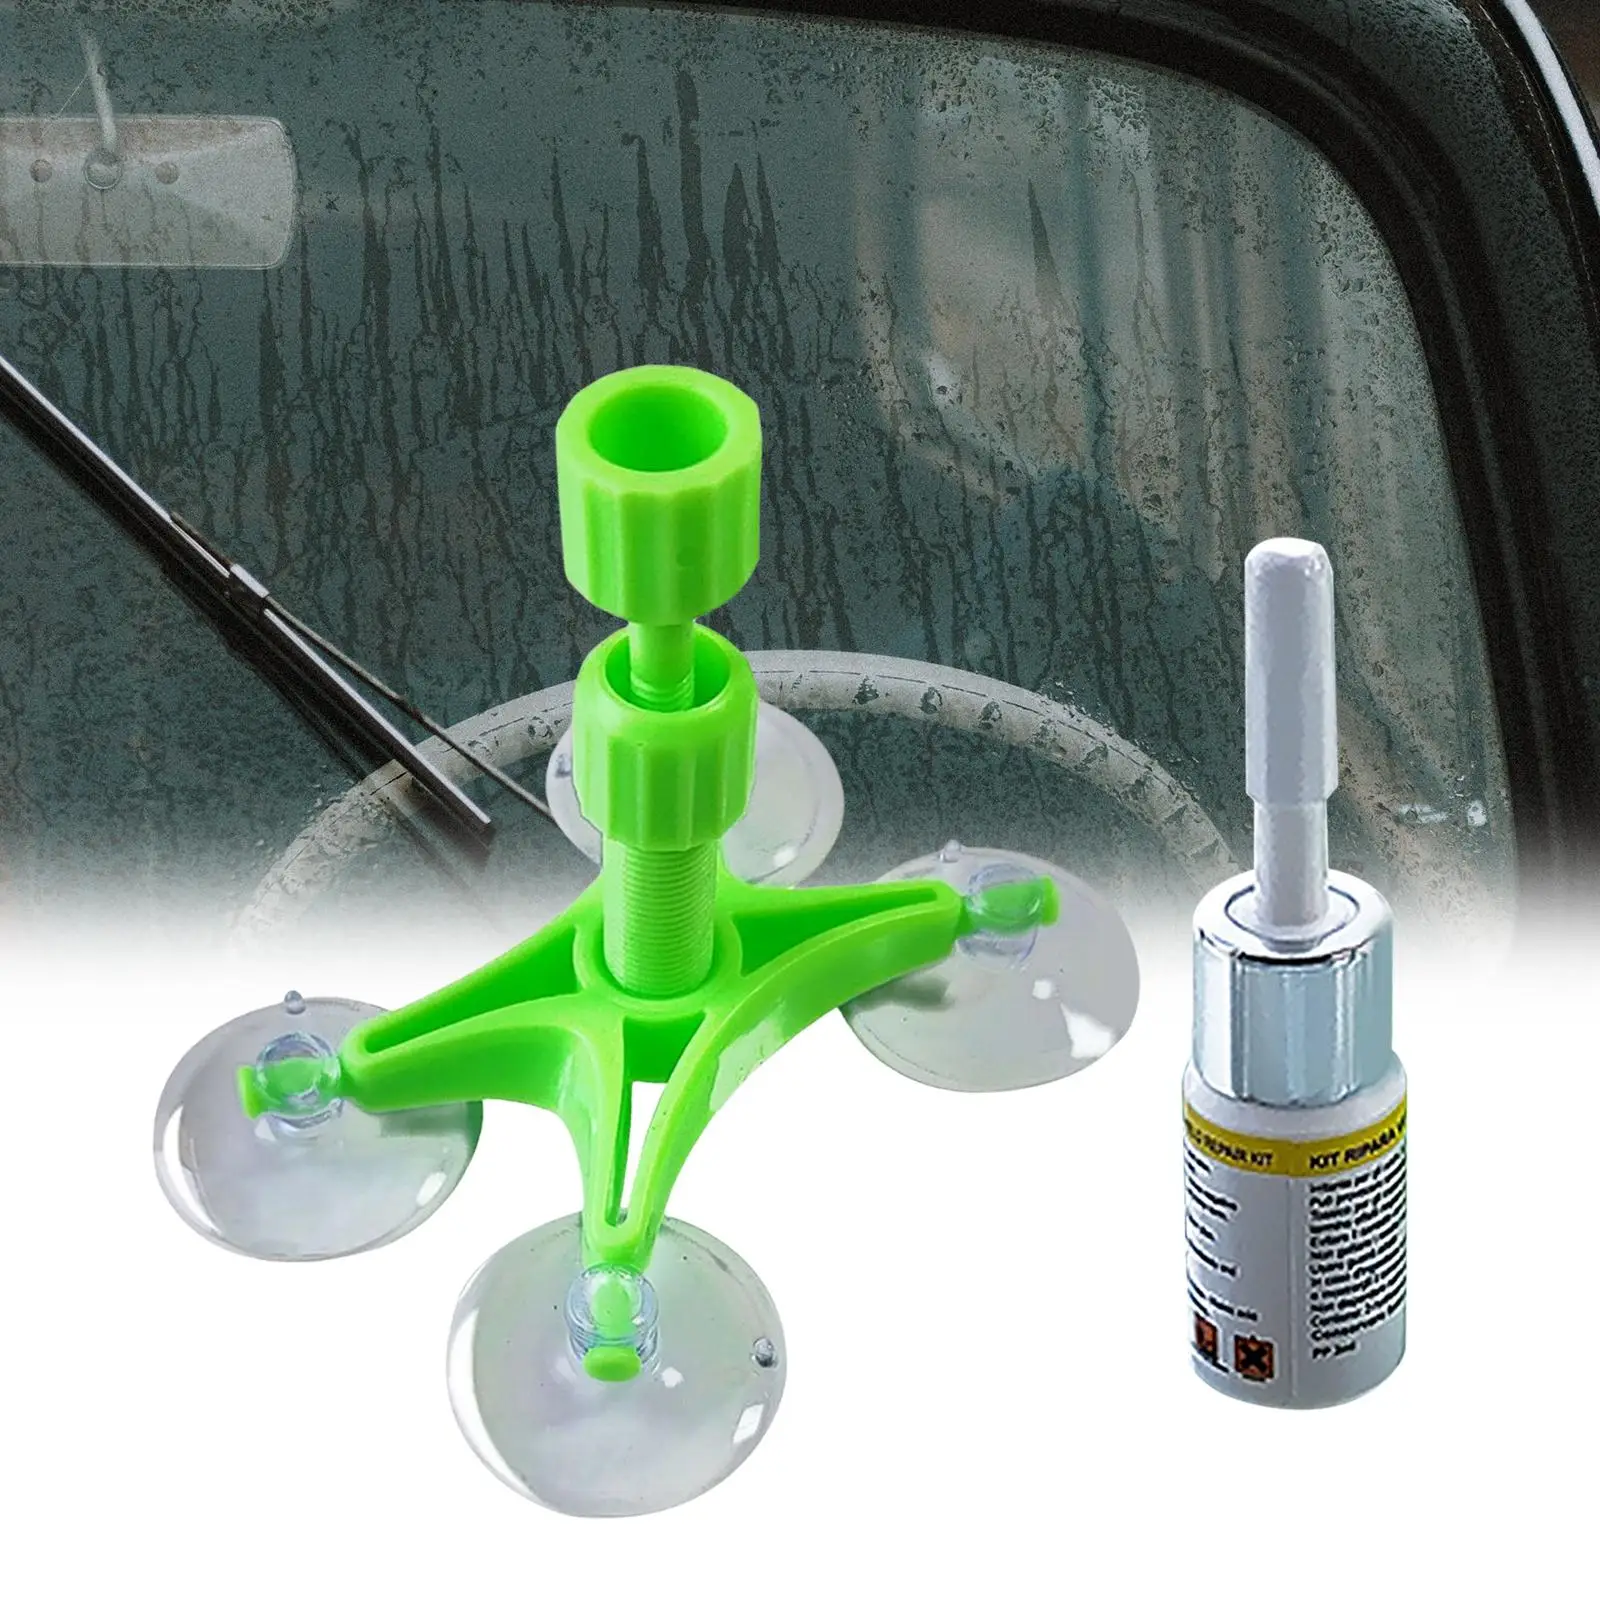 Car Auto Glass Windshield Fluid Repair Set for Chips and Cracks Widely Use